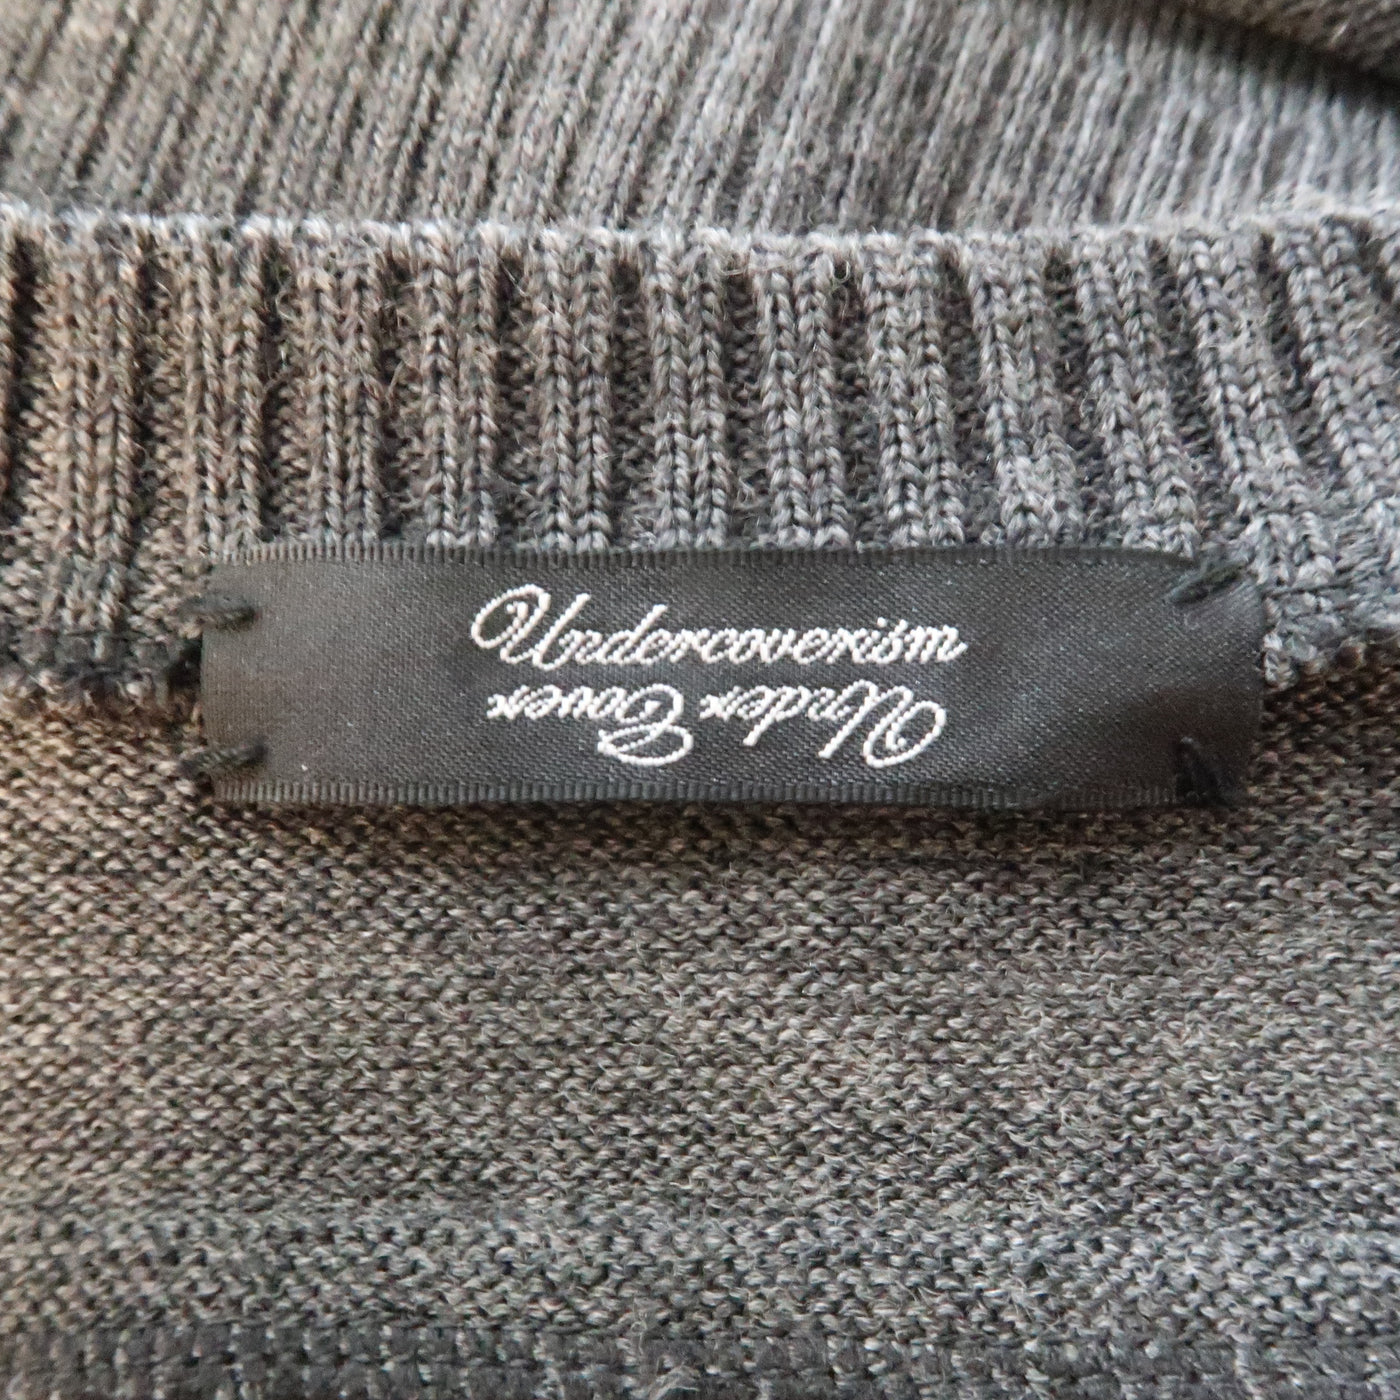 UNDERCOVER Size L Charcoal Solid Wool V-Neck Pullover